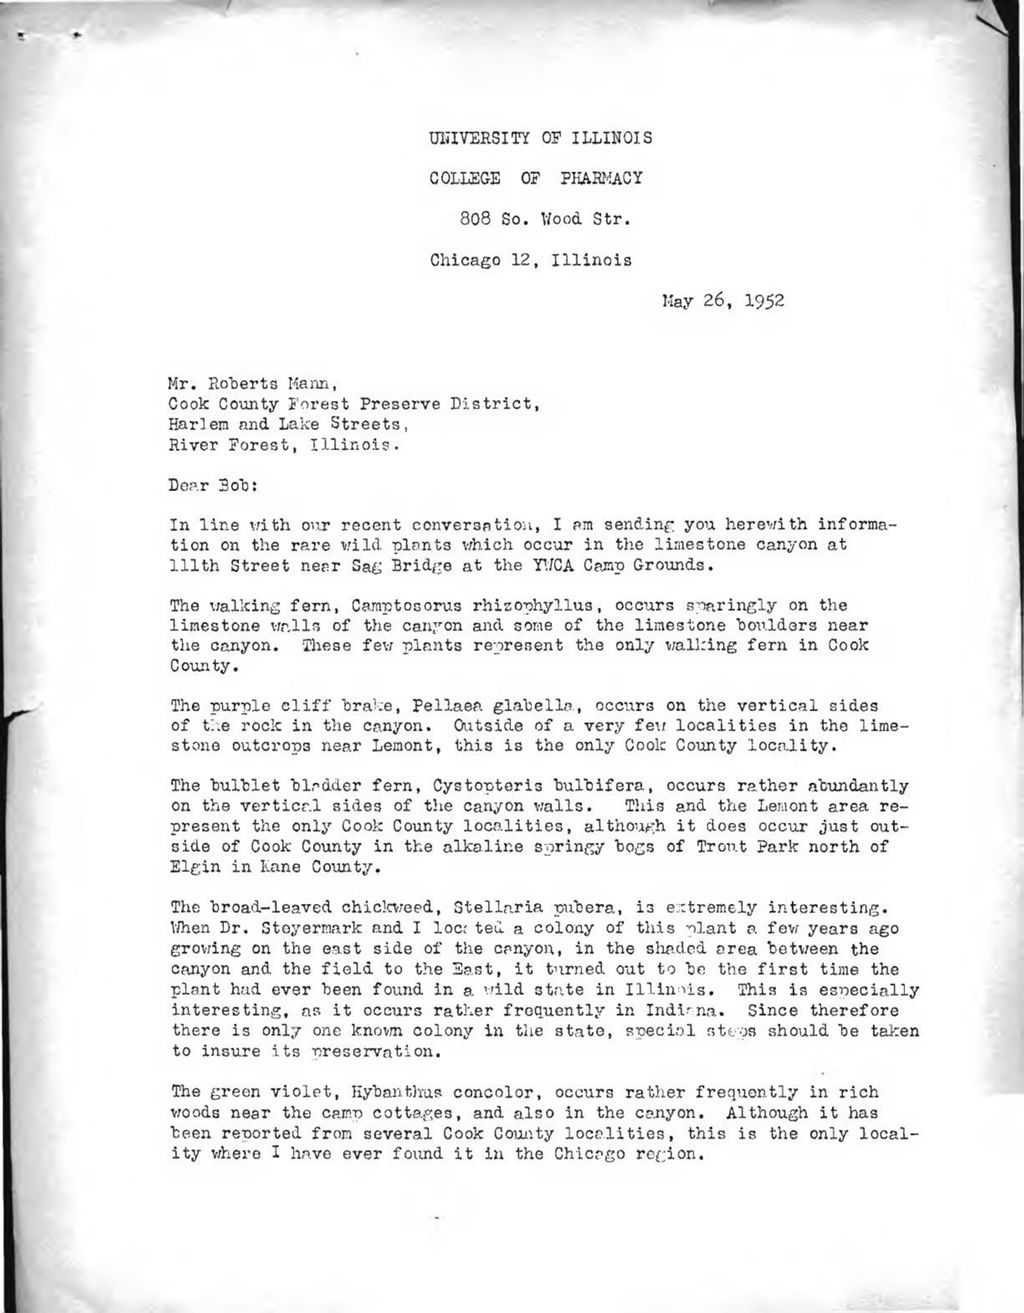 Miniature of Letter from Floyd A. Swink, University of Illinois, to Roberts Mann, 1952